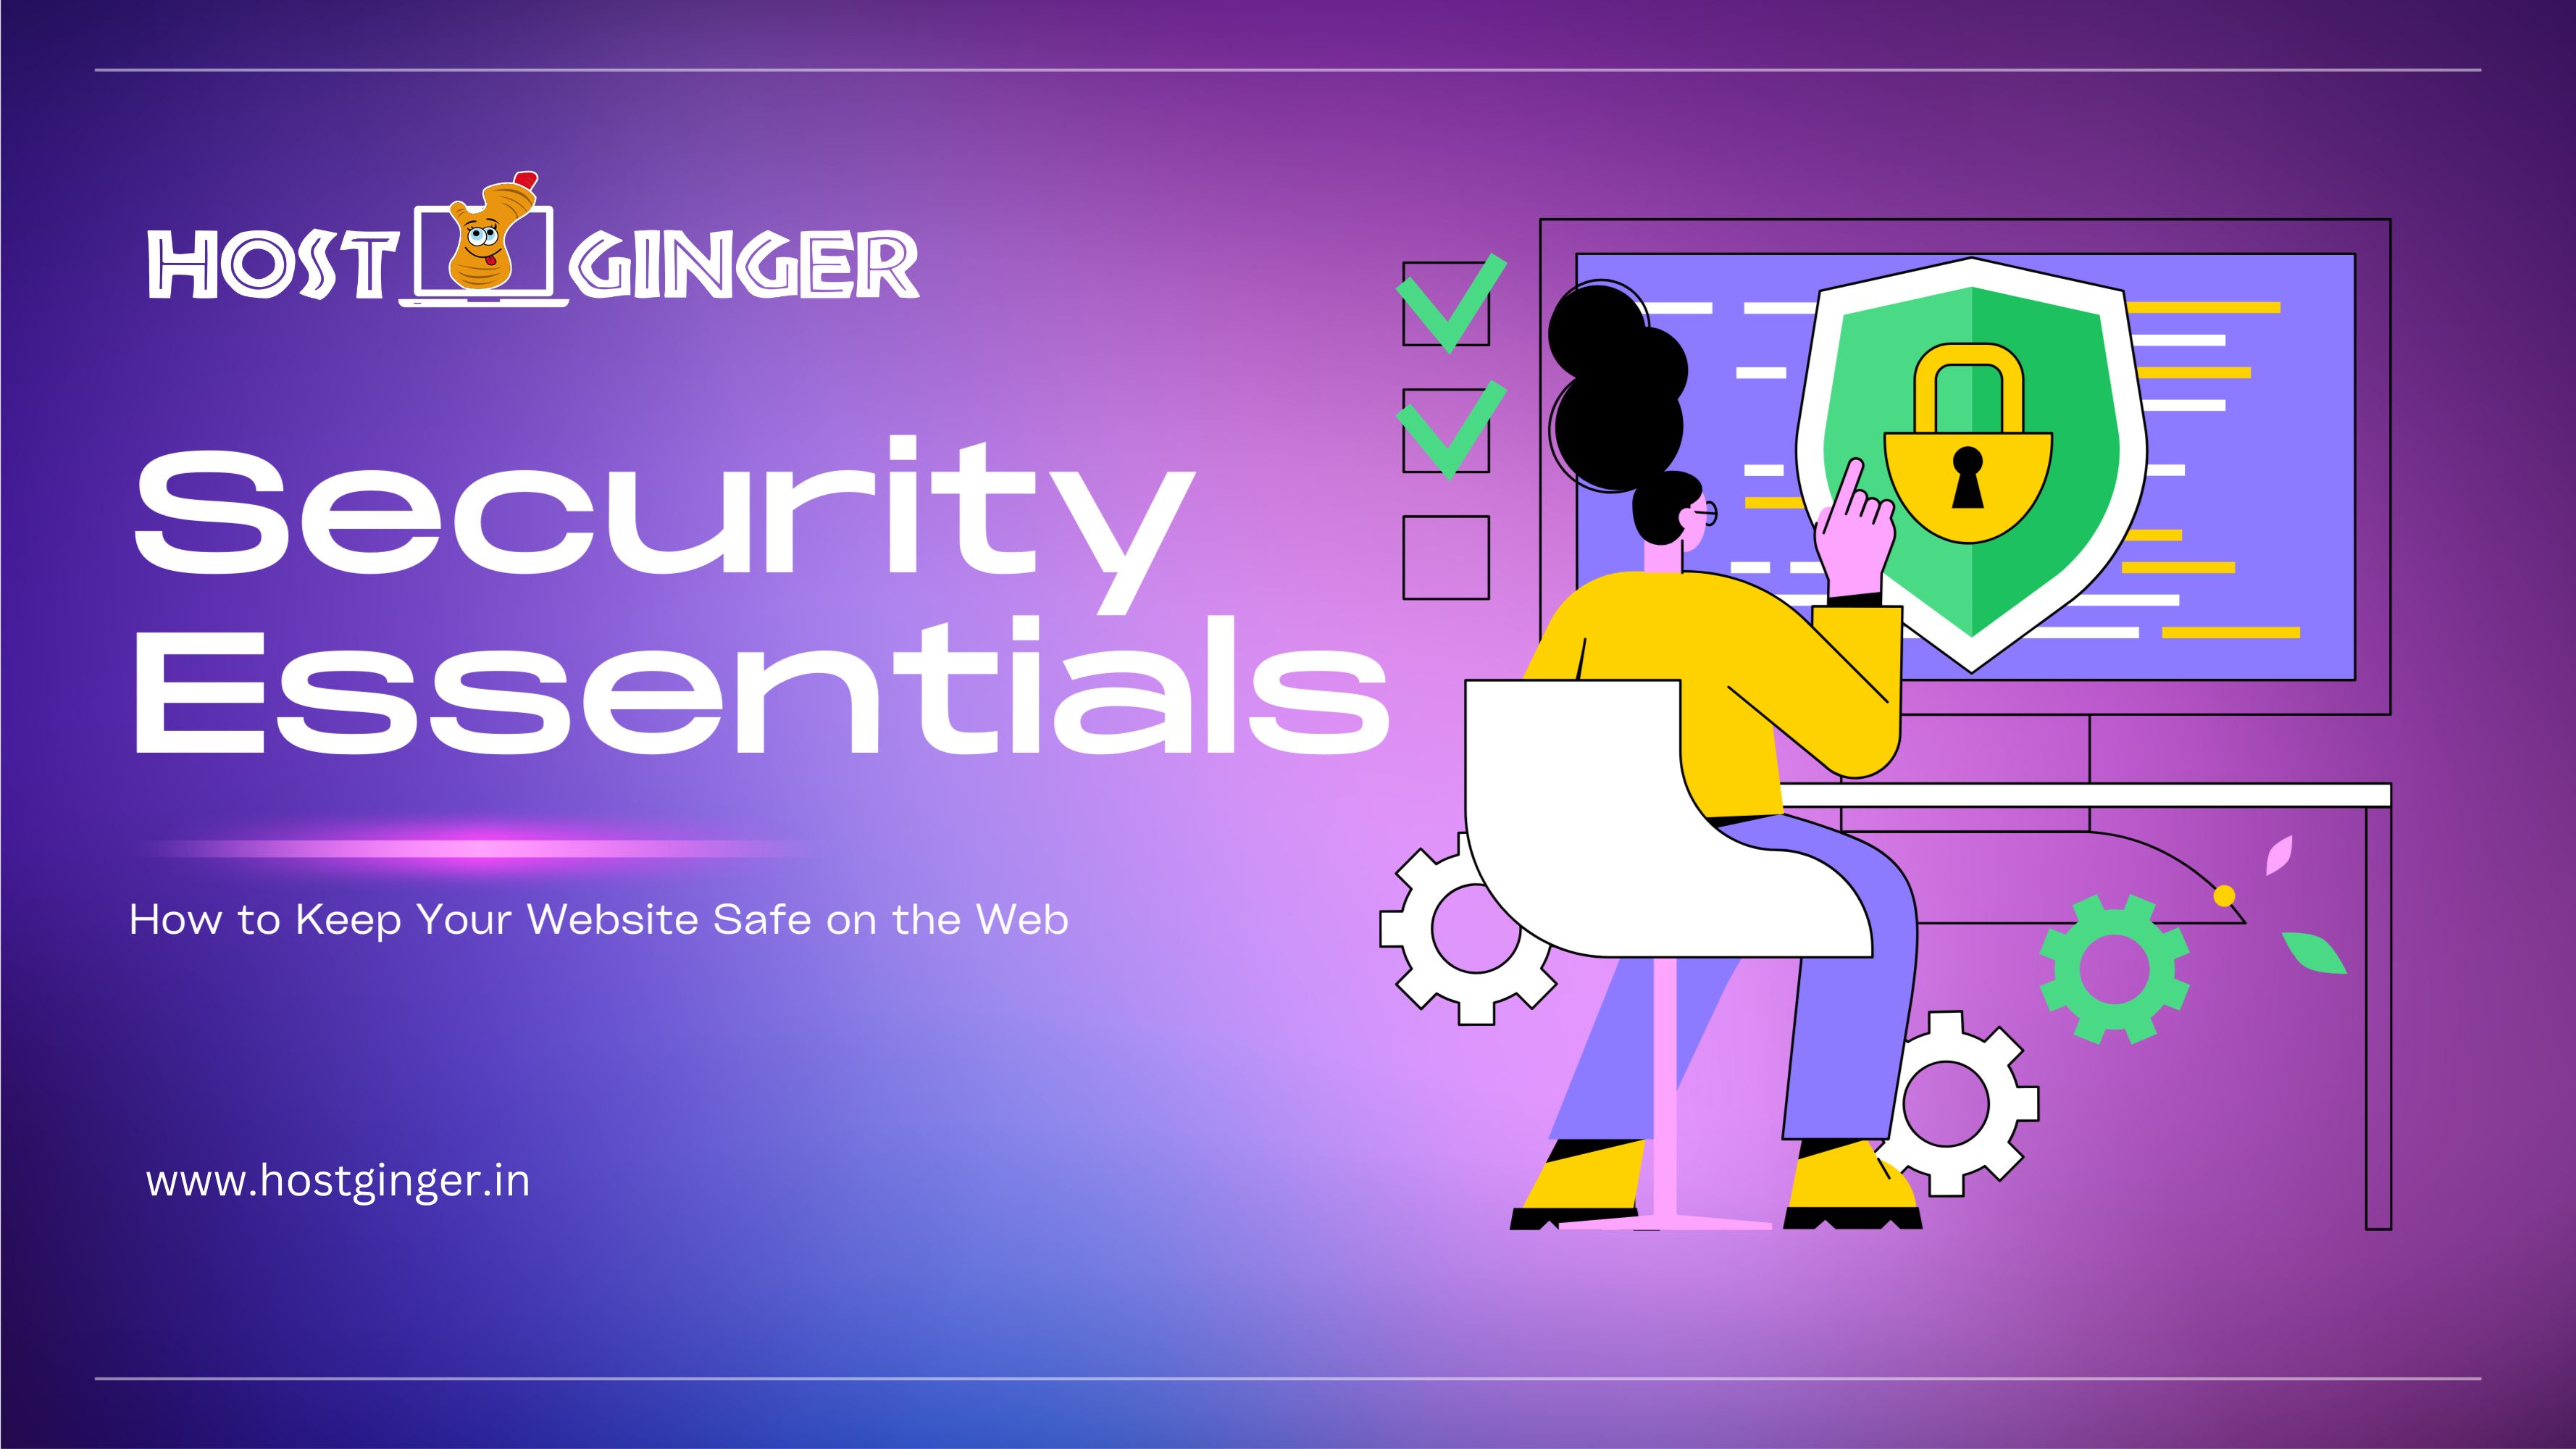 How to Keep Your Website Safe on the Web